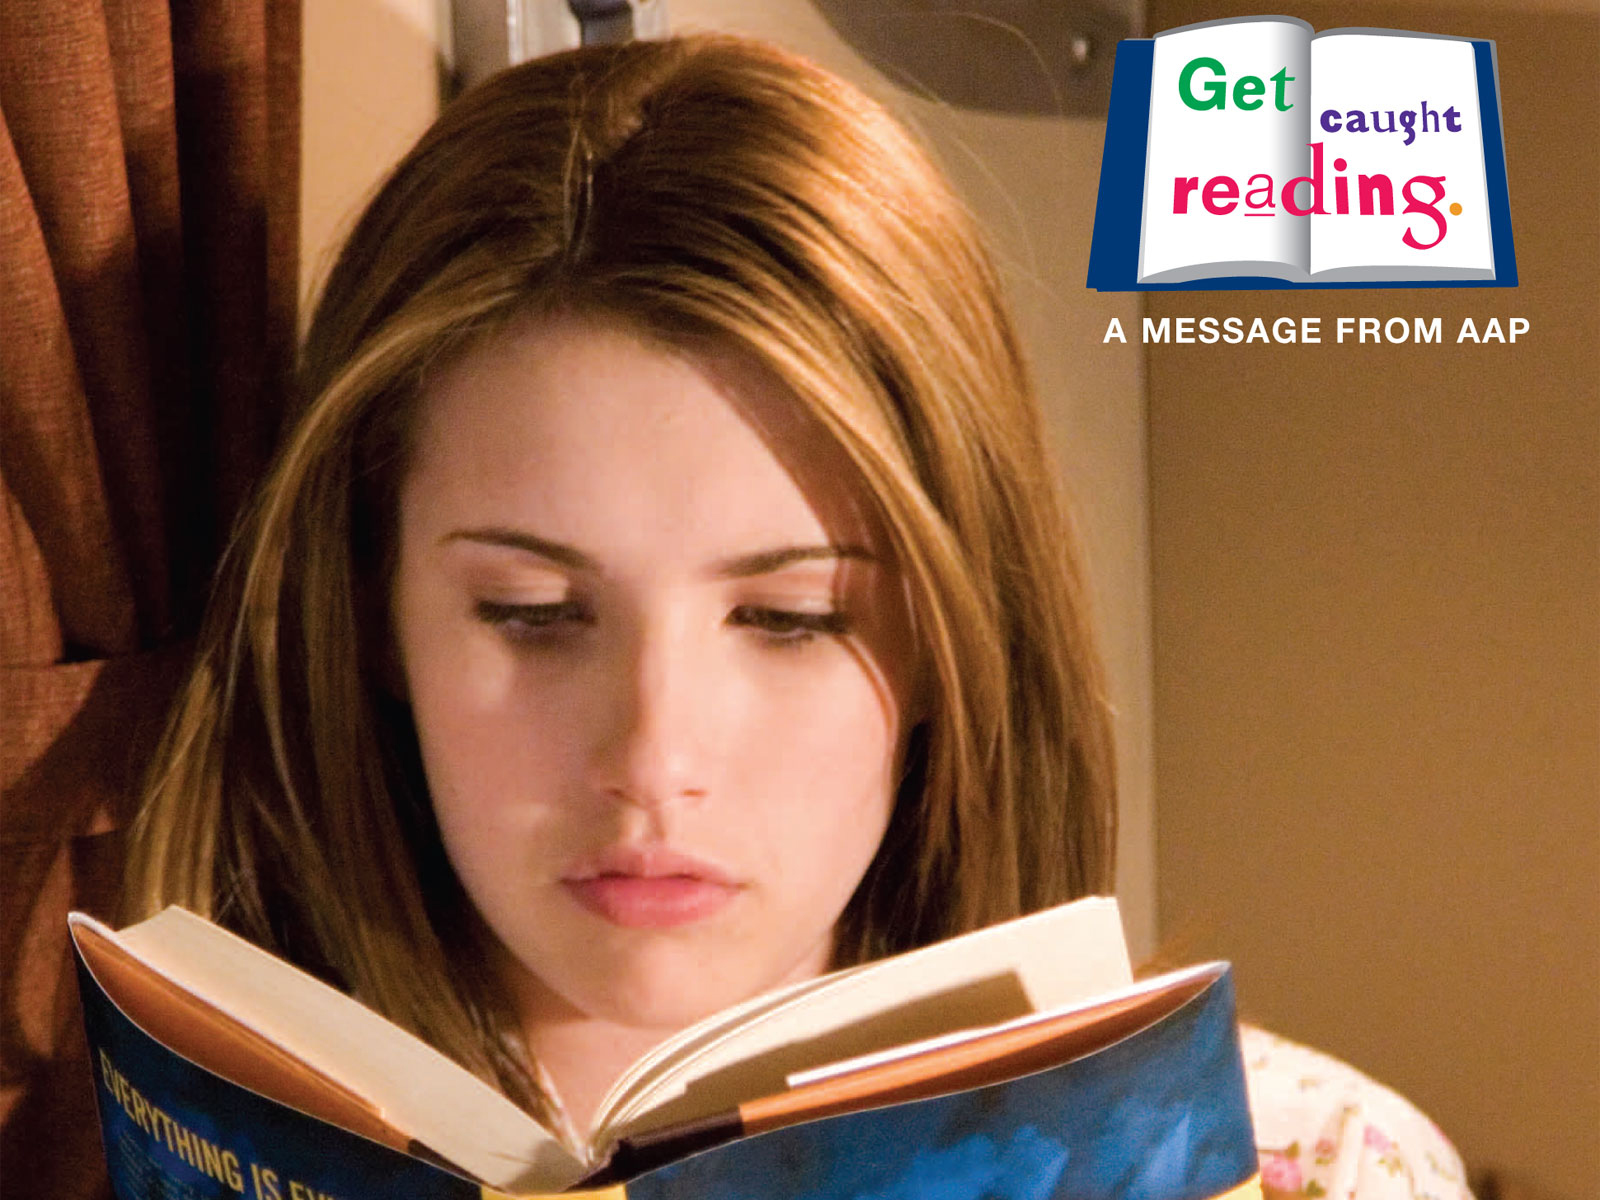 Get Caught Reading Celebrity Posters